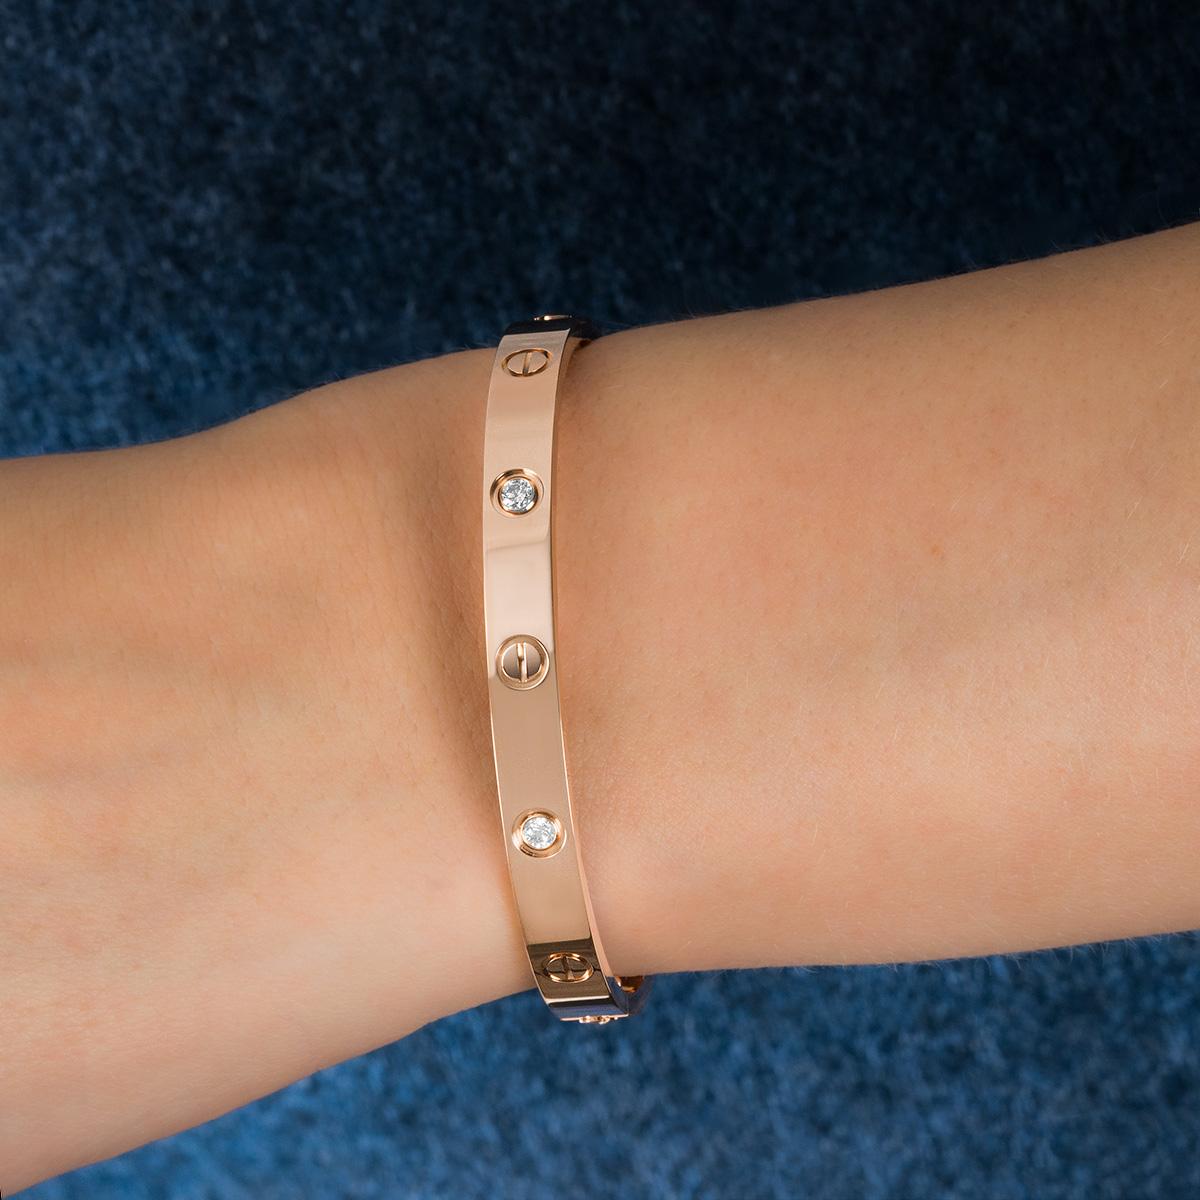 Cartier Rose Gold Half Diamond Love Bracelet Size 17 B6036017 In Excellent Condition For Sale In London, GB